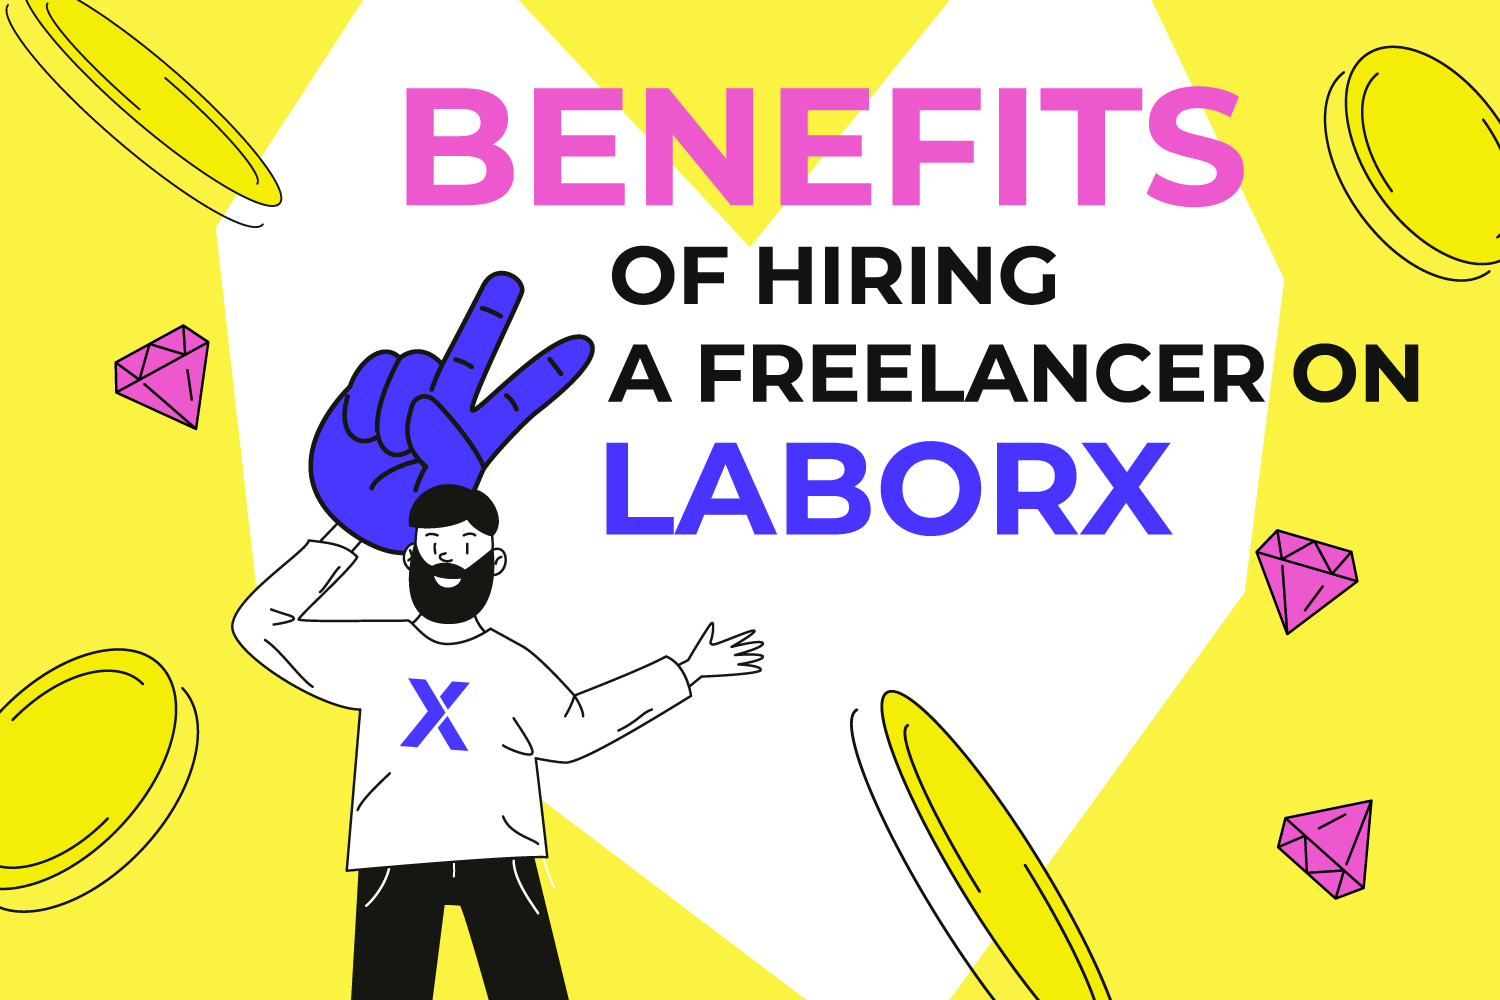 The Benefits Of Hiring A Freelancer On LaborX